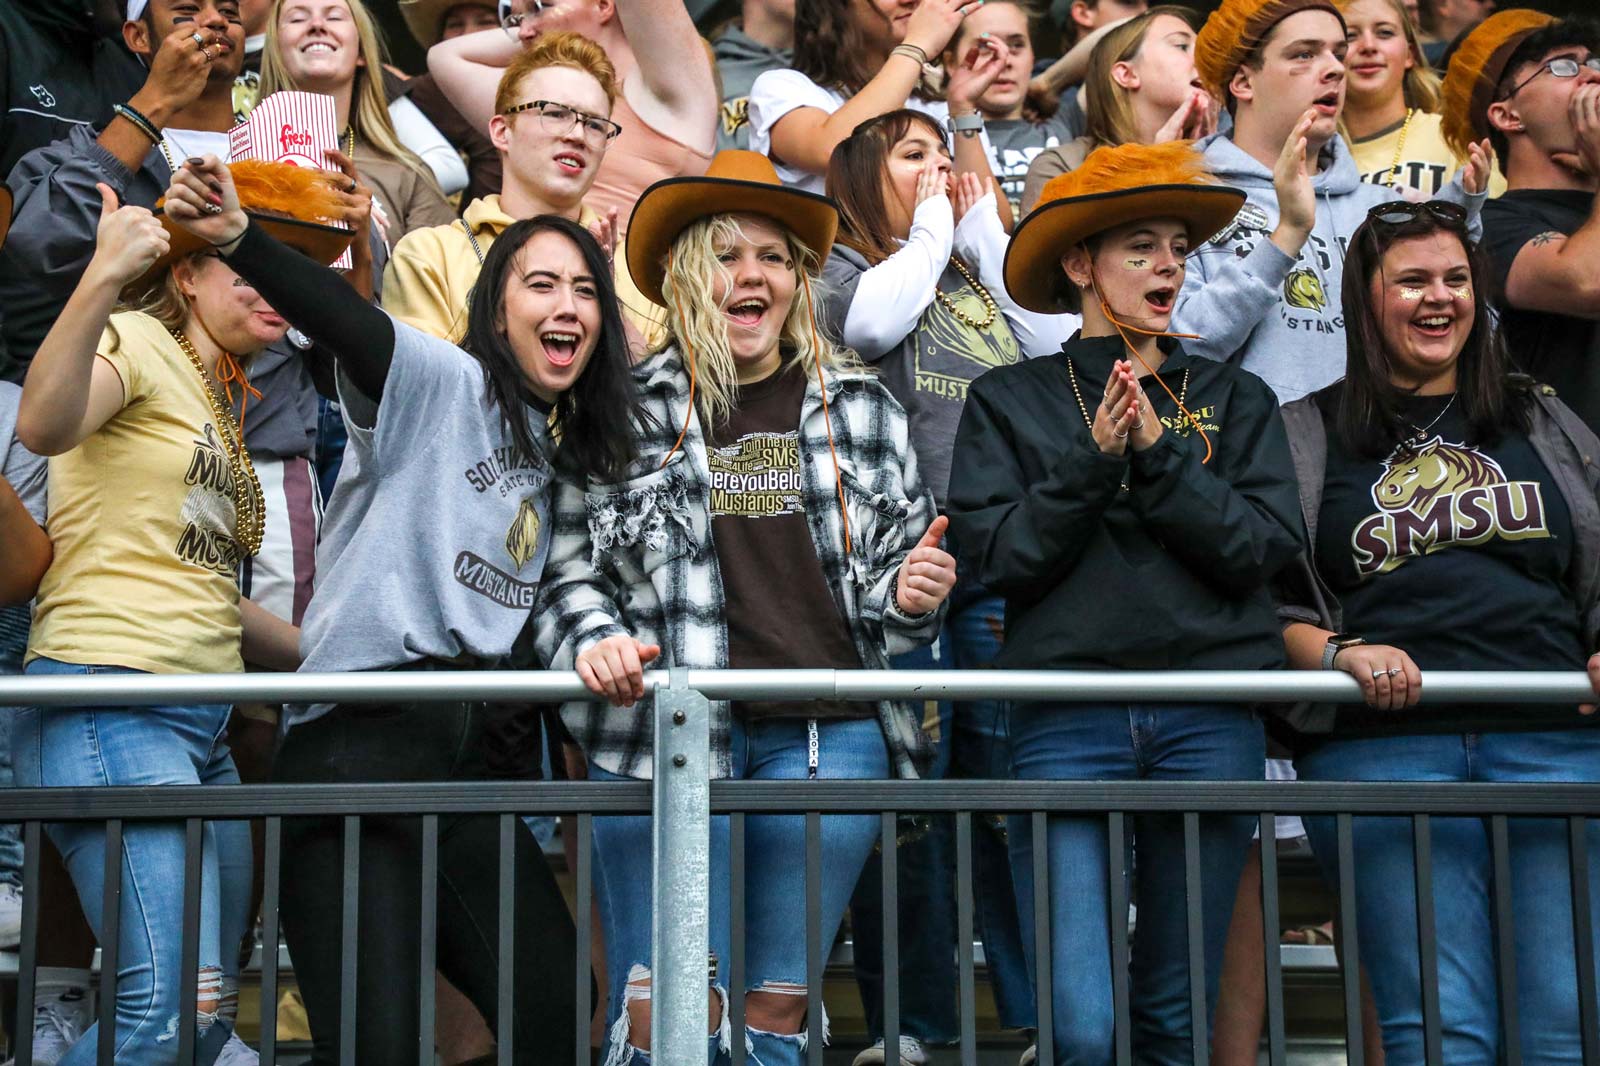 SMSU Homecoming Week, Sept. 26-Oct. 2 Featured Image